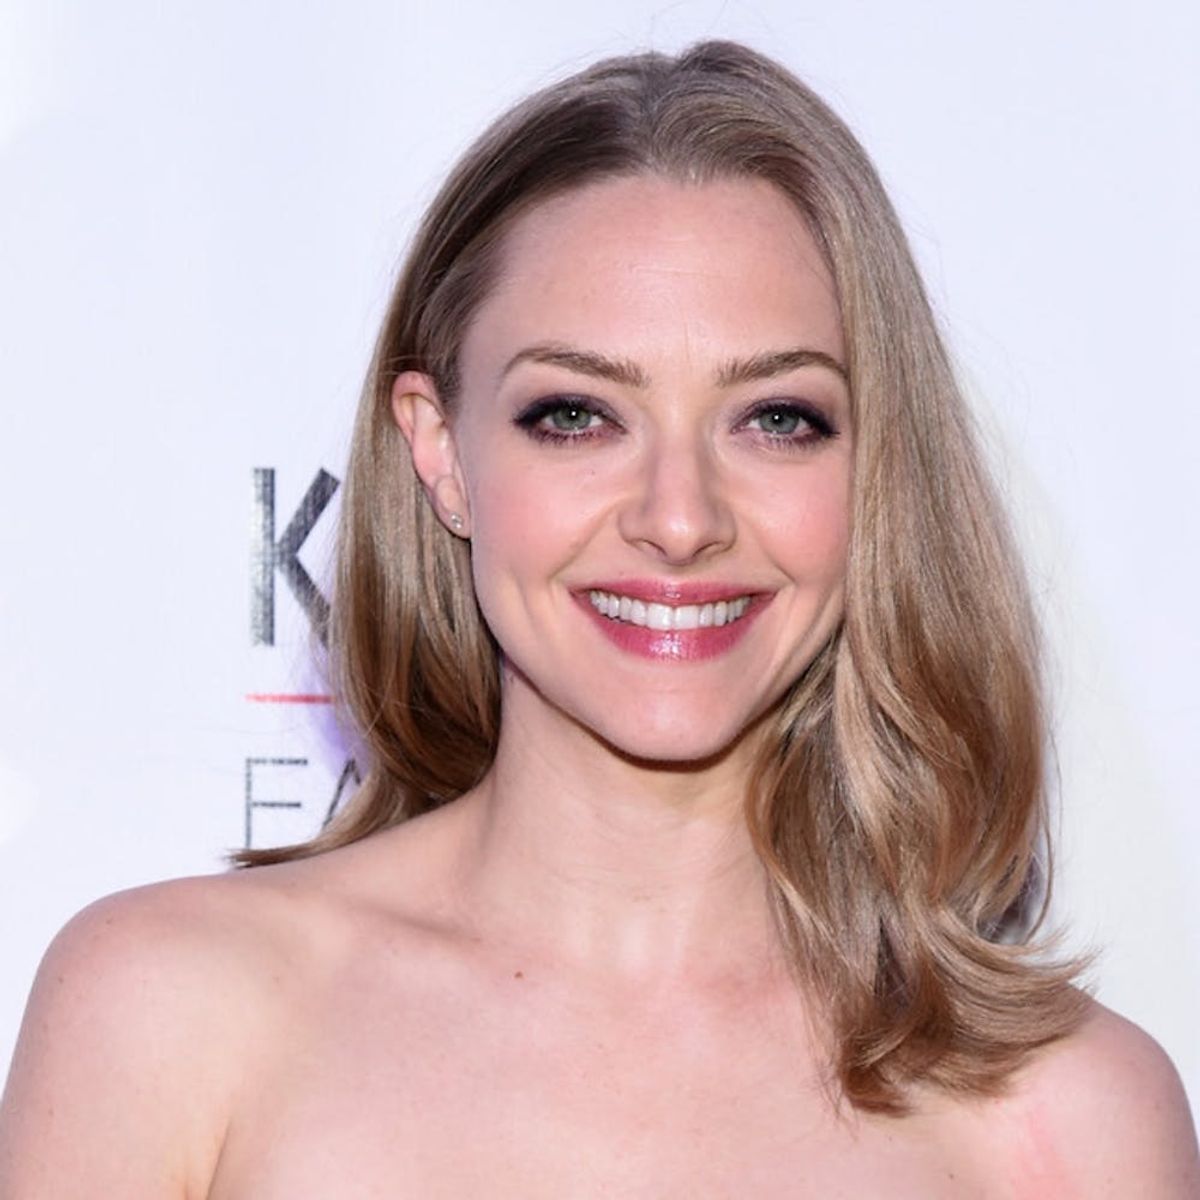 Morning Buzz! Amanda Seyfried Reveals She’s Pregnant by Bringing Her Baby Bump to the Red Carpet + More